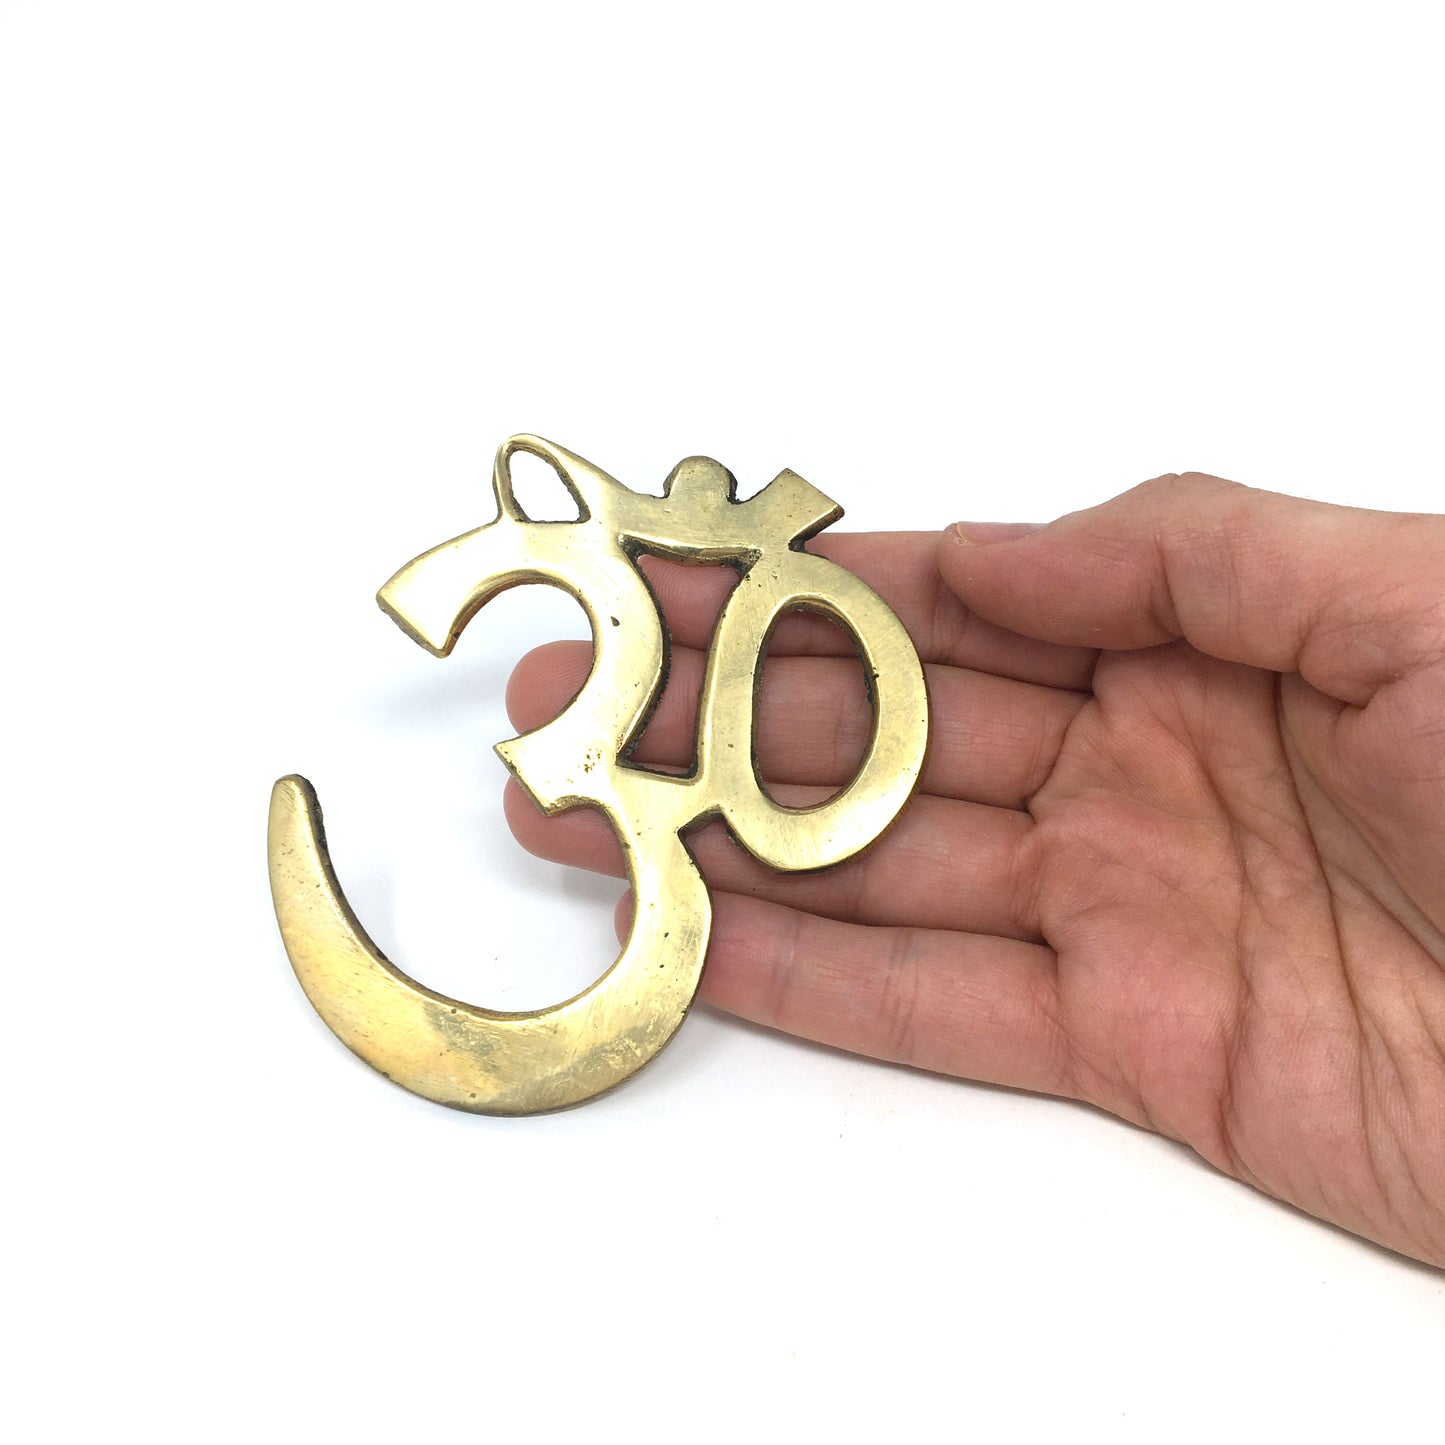 2 Om Symbols Handcrafted India Brass Decorative Wall Hanging- Detailed 3.5"